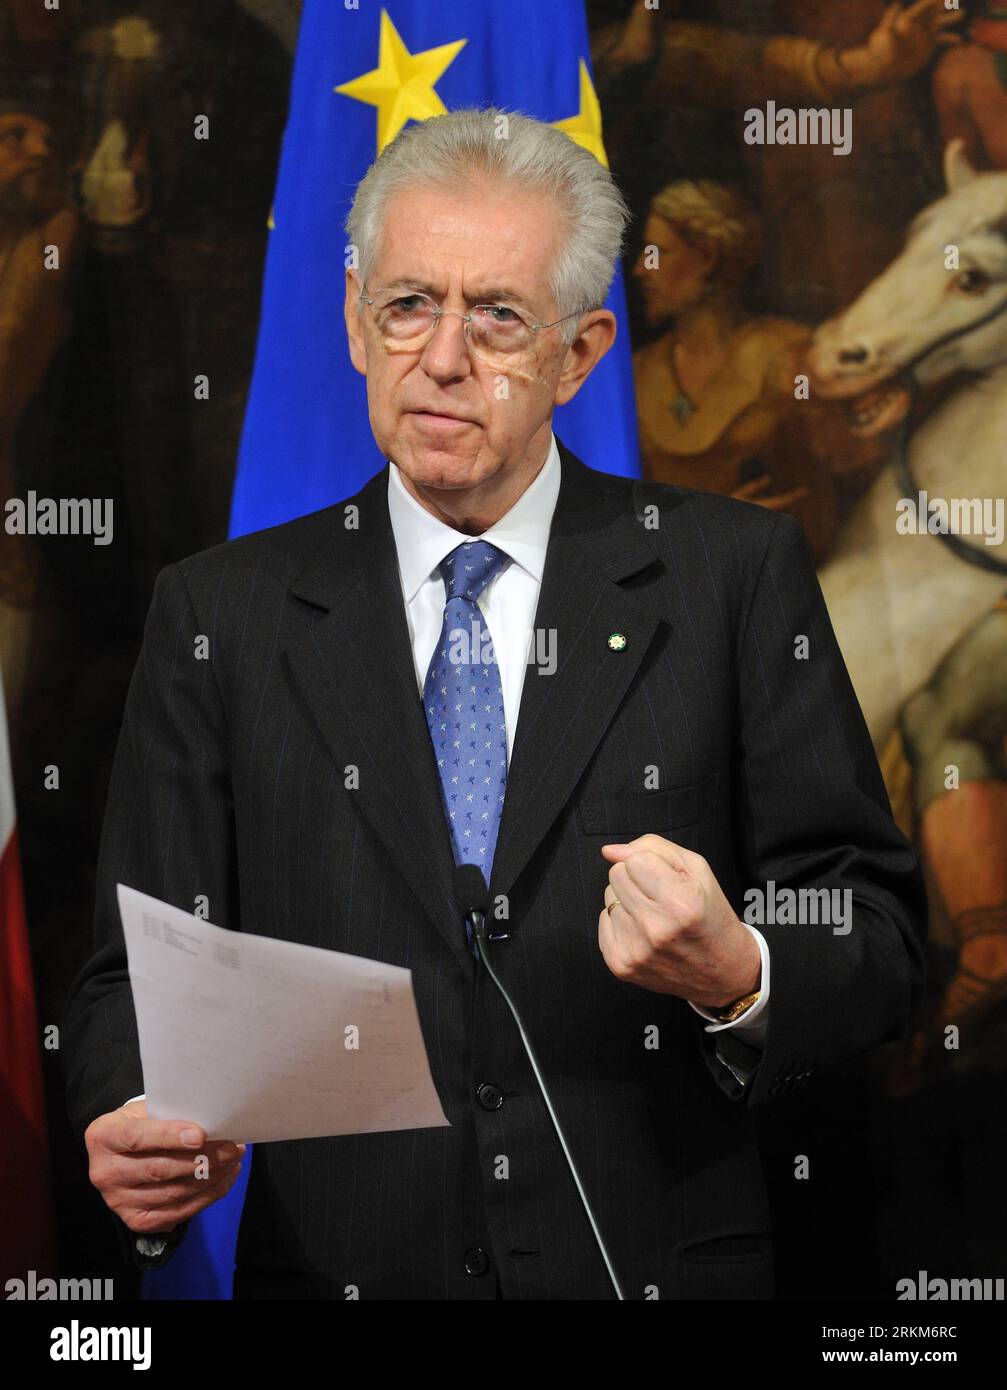 Bildnummer: 56533028  Datum: 29.11.2011  Copyright: imago/Xinhua (111129) -- ROME, Nov. 29, 2011 (Xinhua) -- Italian Prime Minister Mario Monti addresses vice ministers and undersecretaries of state at the Chigi Palace in Rome, Italy, Nov. 29, 2011. Monti appointed 3 vice ministers and 25 undersecretaries Tuesday, finishing the final touches of his technocracy government. (Xinhua/Wang Qingqin) ITALY-ROME-MONTI-GOVERNMENT PUBLICATIONxNOTxINxCHN People Politik Porträt premiumd xns x0x 2011 hoch      56533028 Date 29 11 2011 Copyright Imago XINHUA  Rome Nov 29 2011 XINHUA Italian Prime Ministers Stock Photo